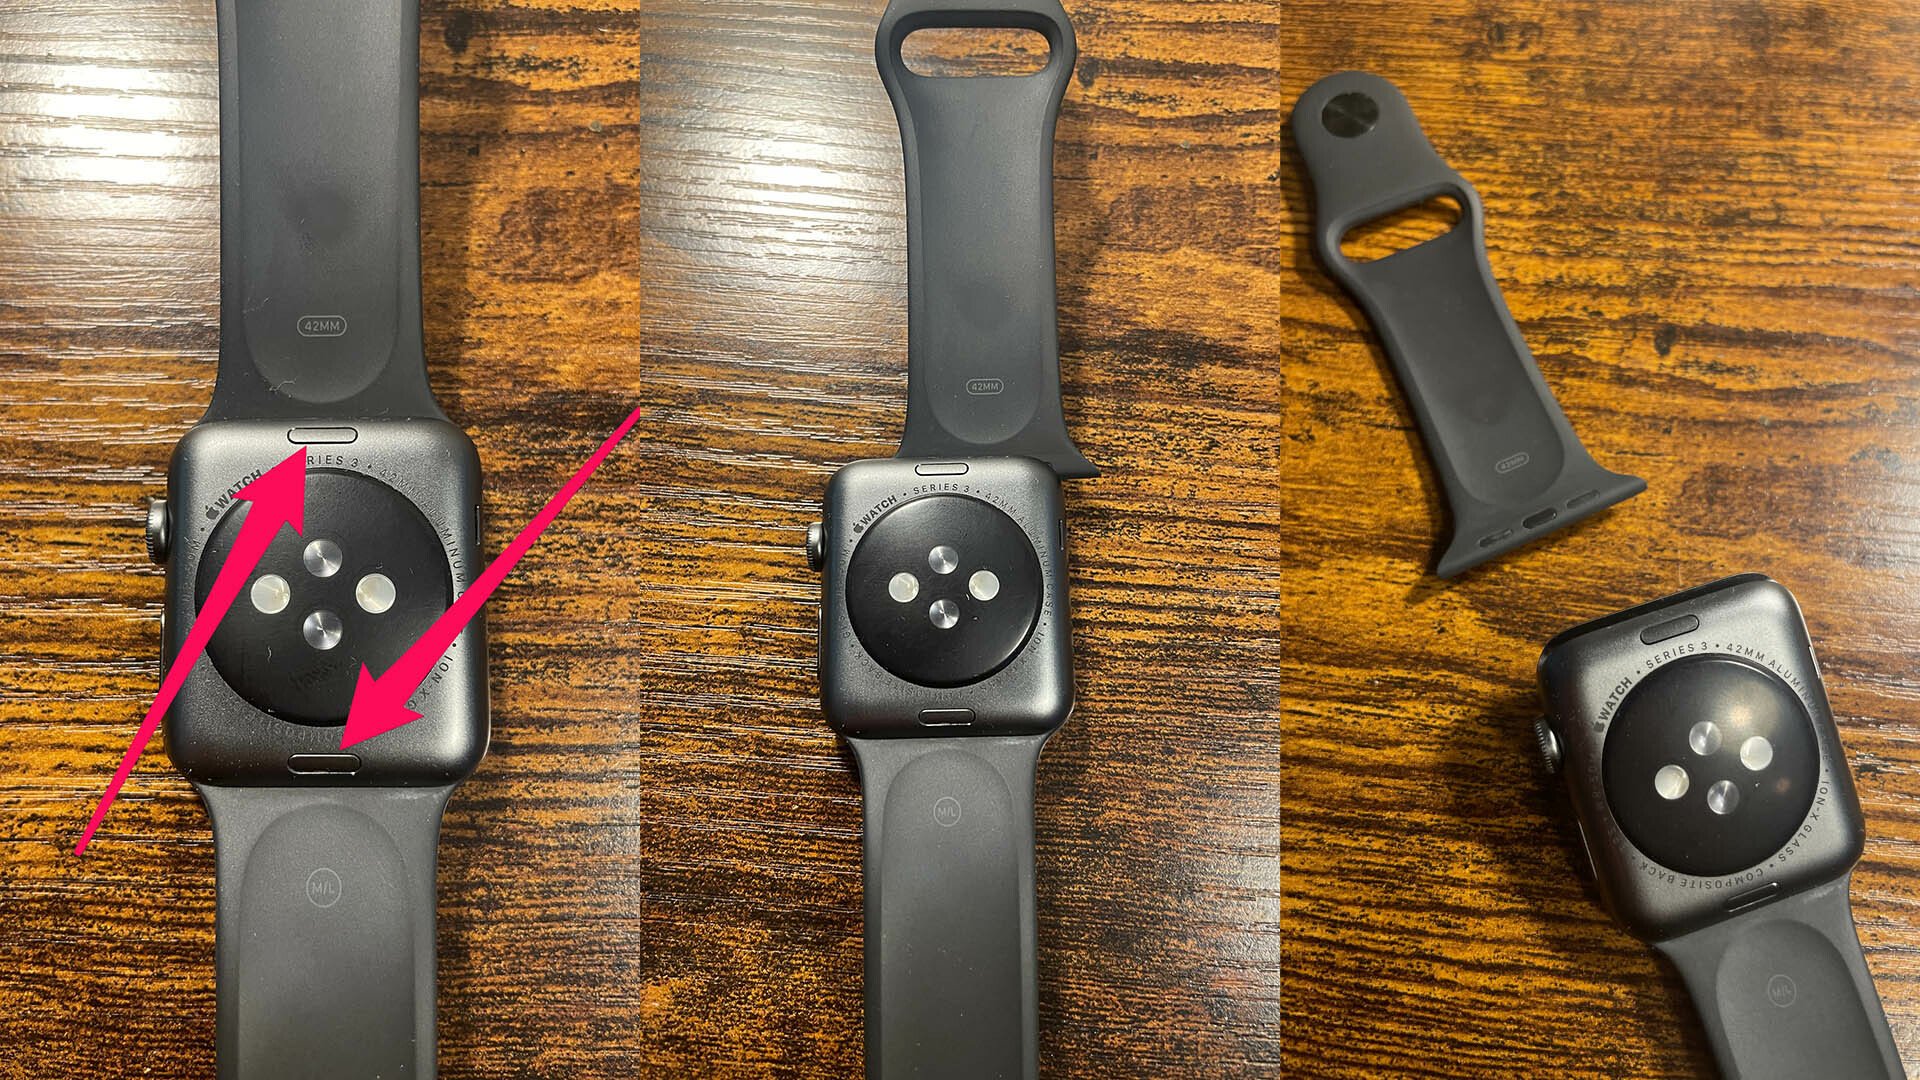 How to remove an Apple Watch and change the band